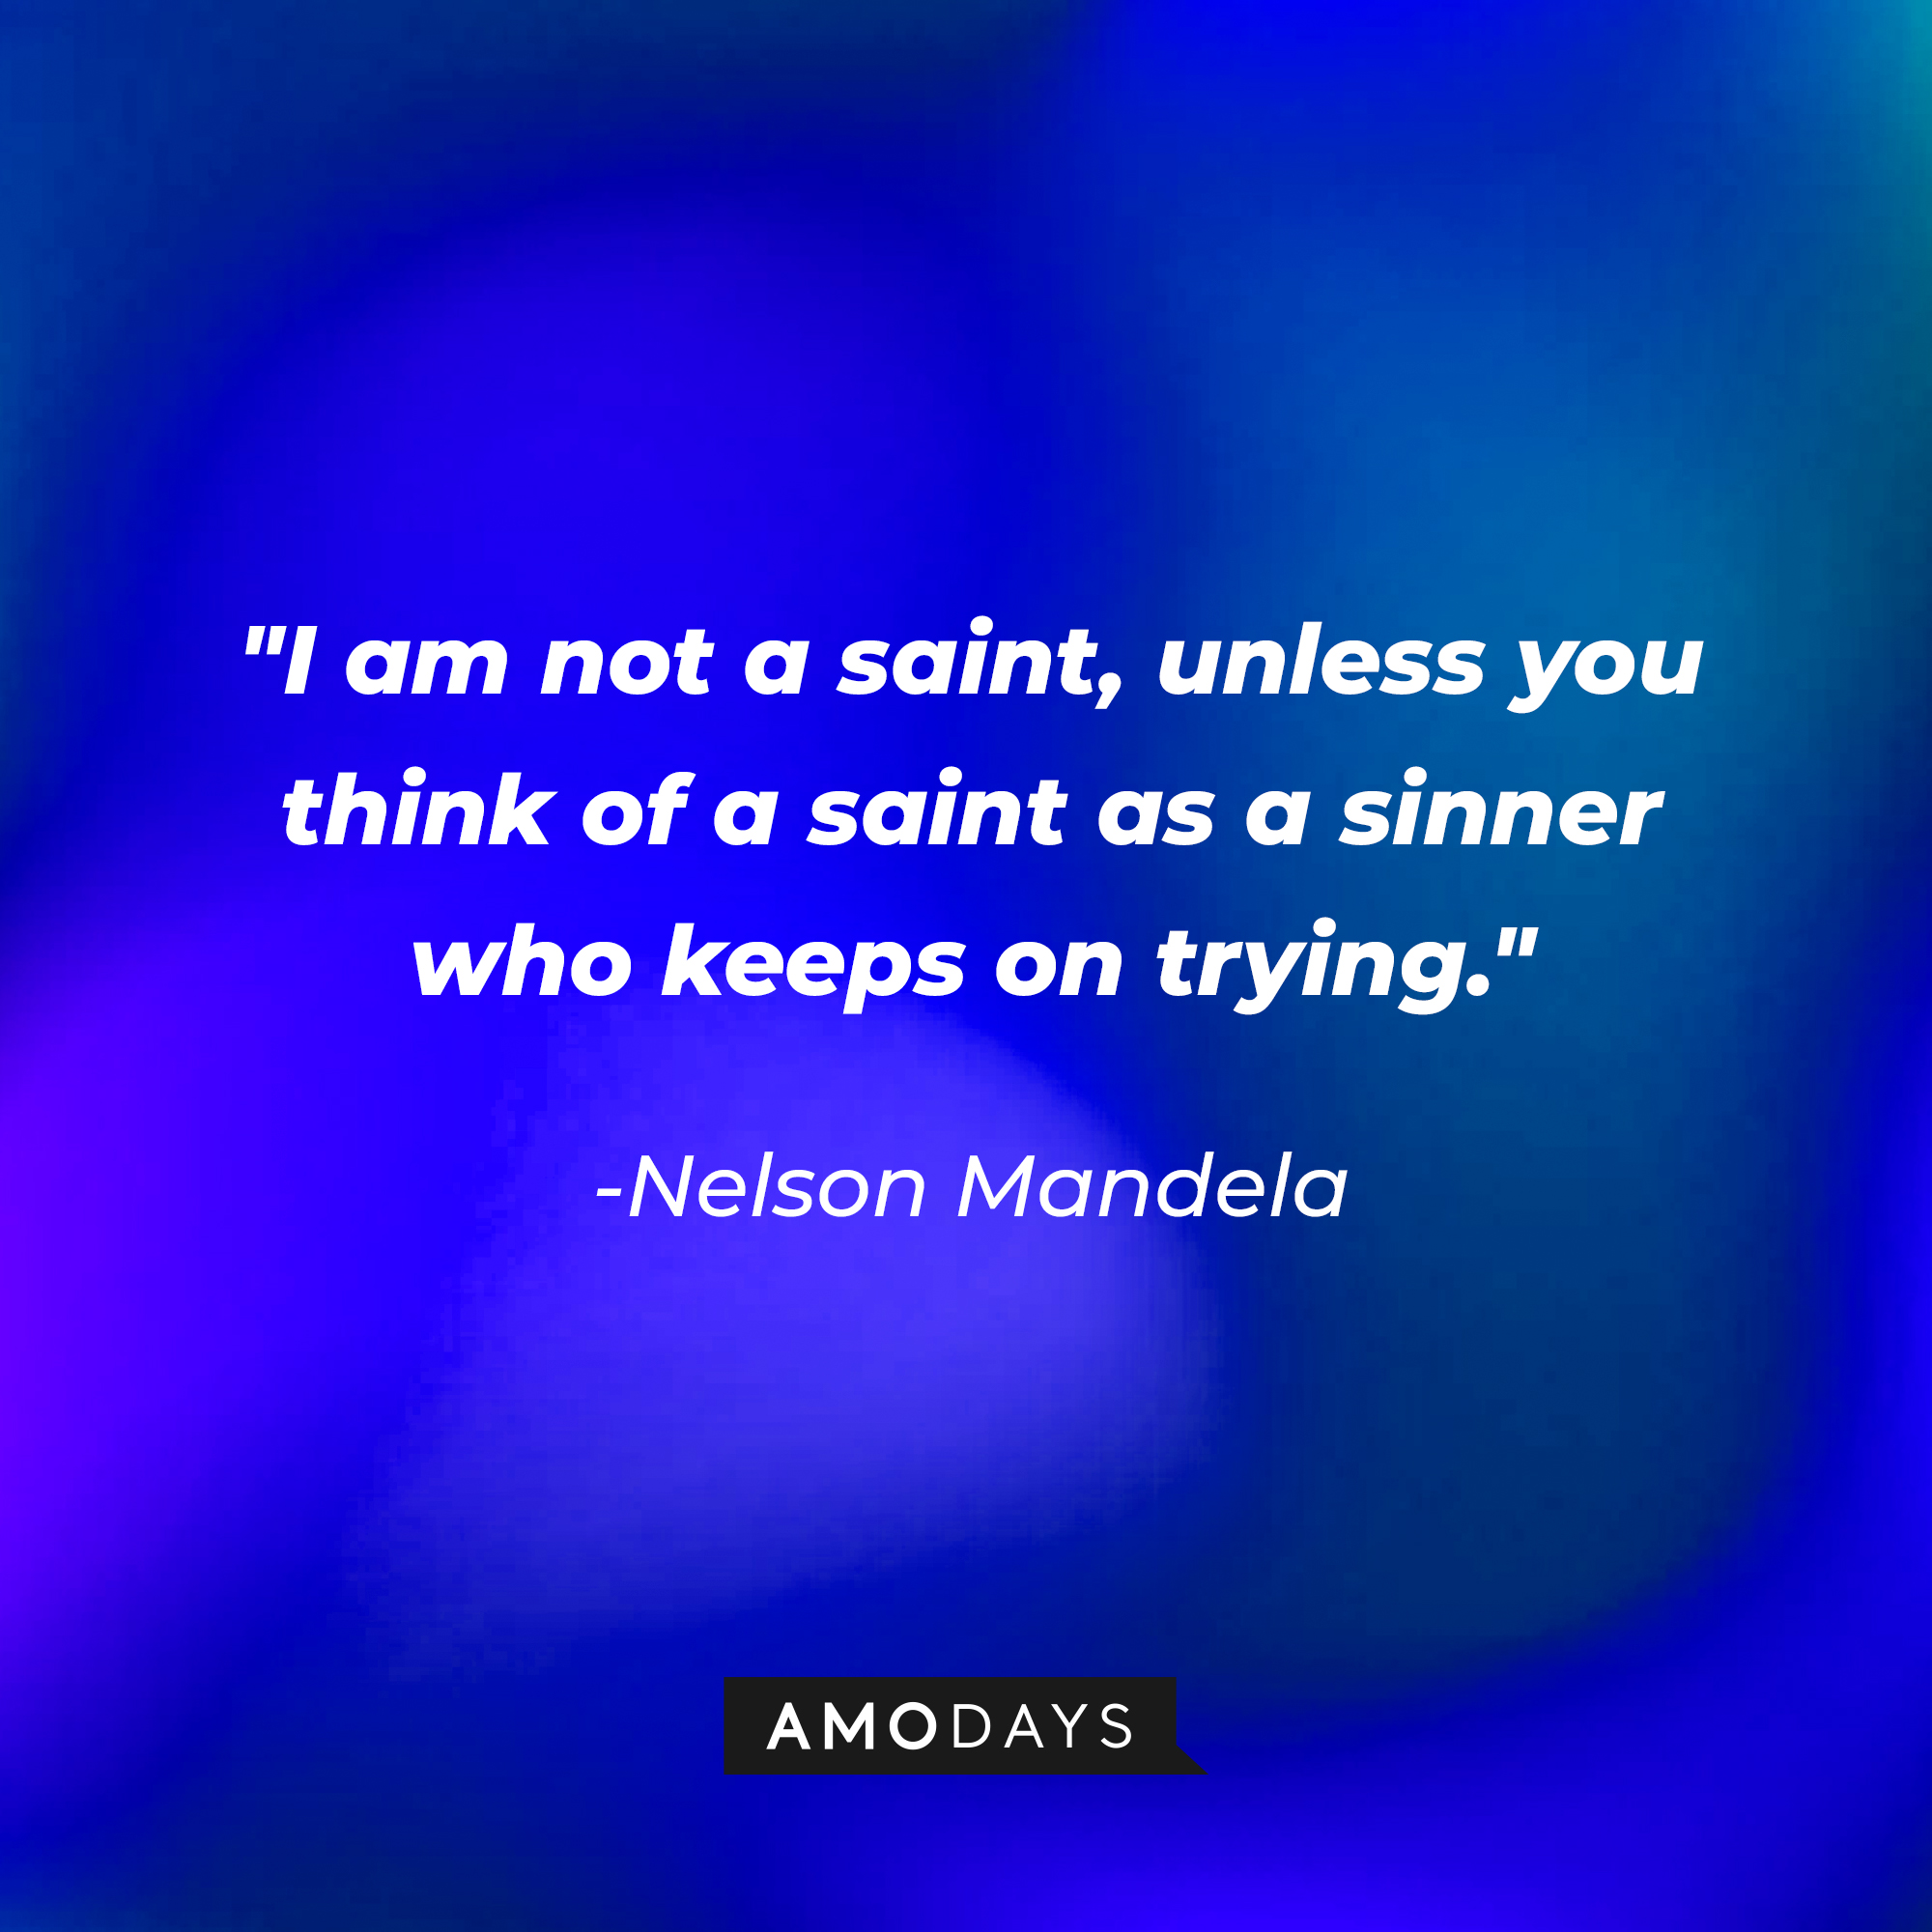 A photo with Nelson Mandela's quote, "I am not a saint, unless you think of a saint as a sinner who keeps on trying." | Source: Amodays